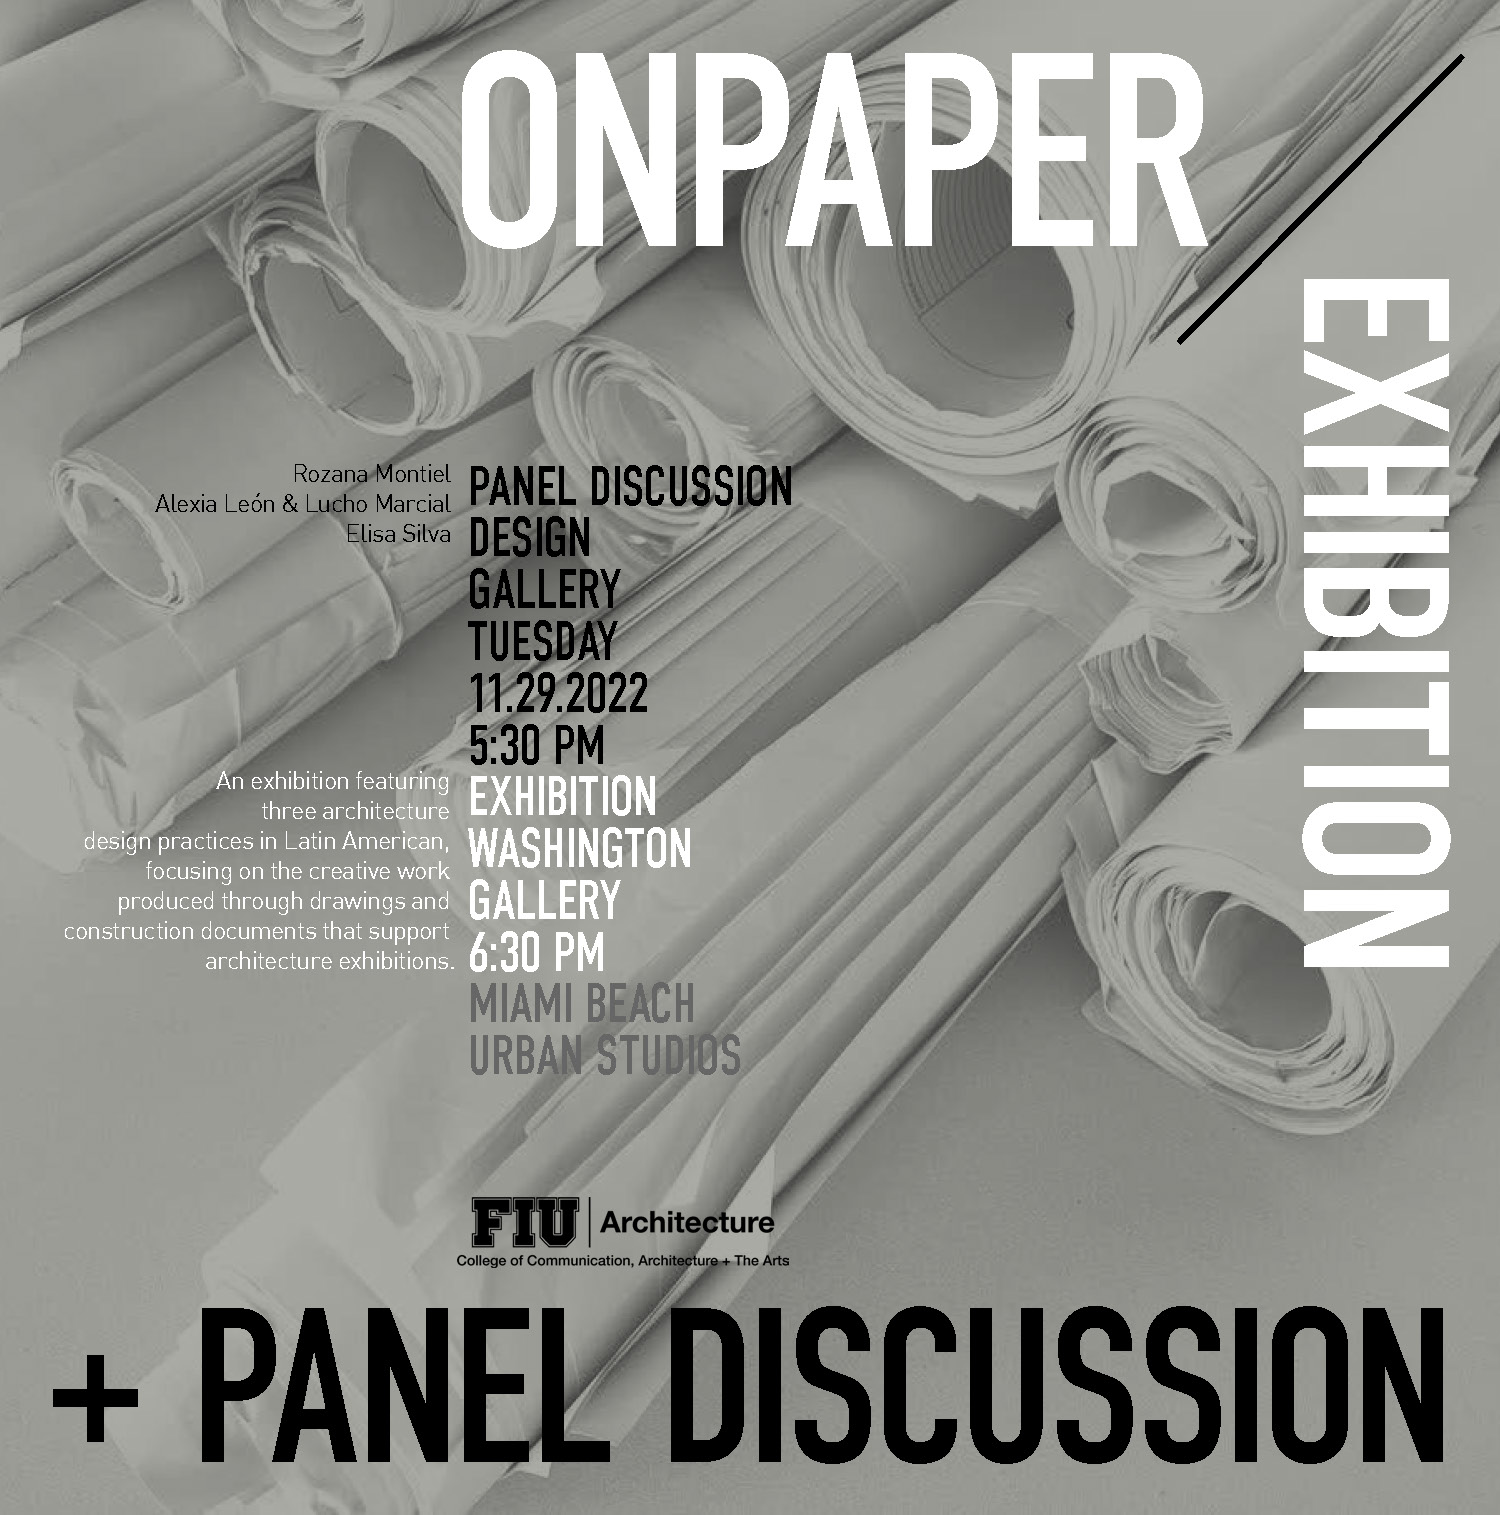 Exhibition “ON PAPER” by Leon Marcial, Rozana Montiel and Enlace Arqutiectura at the Washington Gallery FIU MBUS of Art Basel Miami 2022